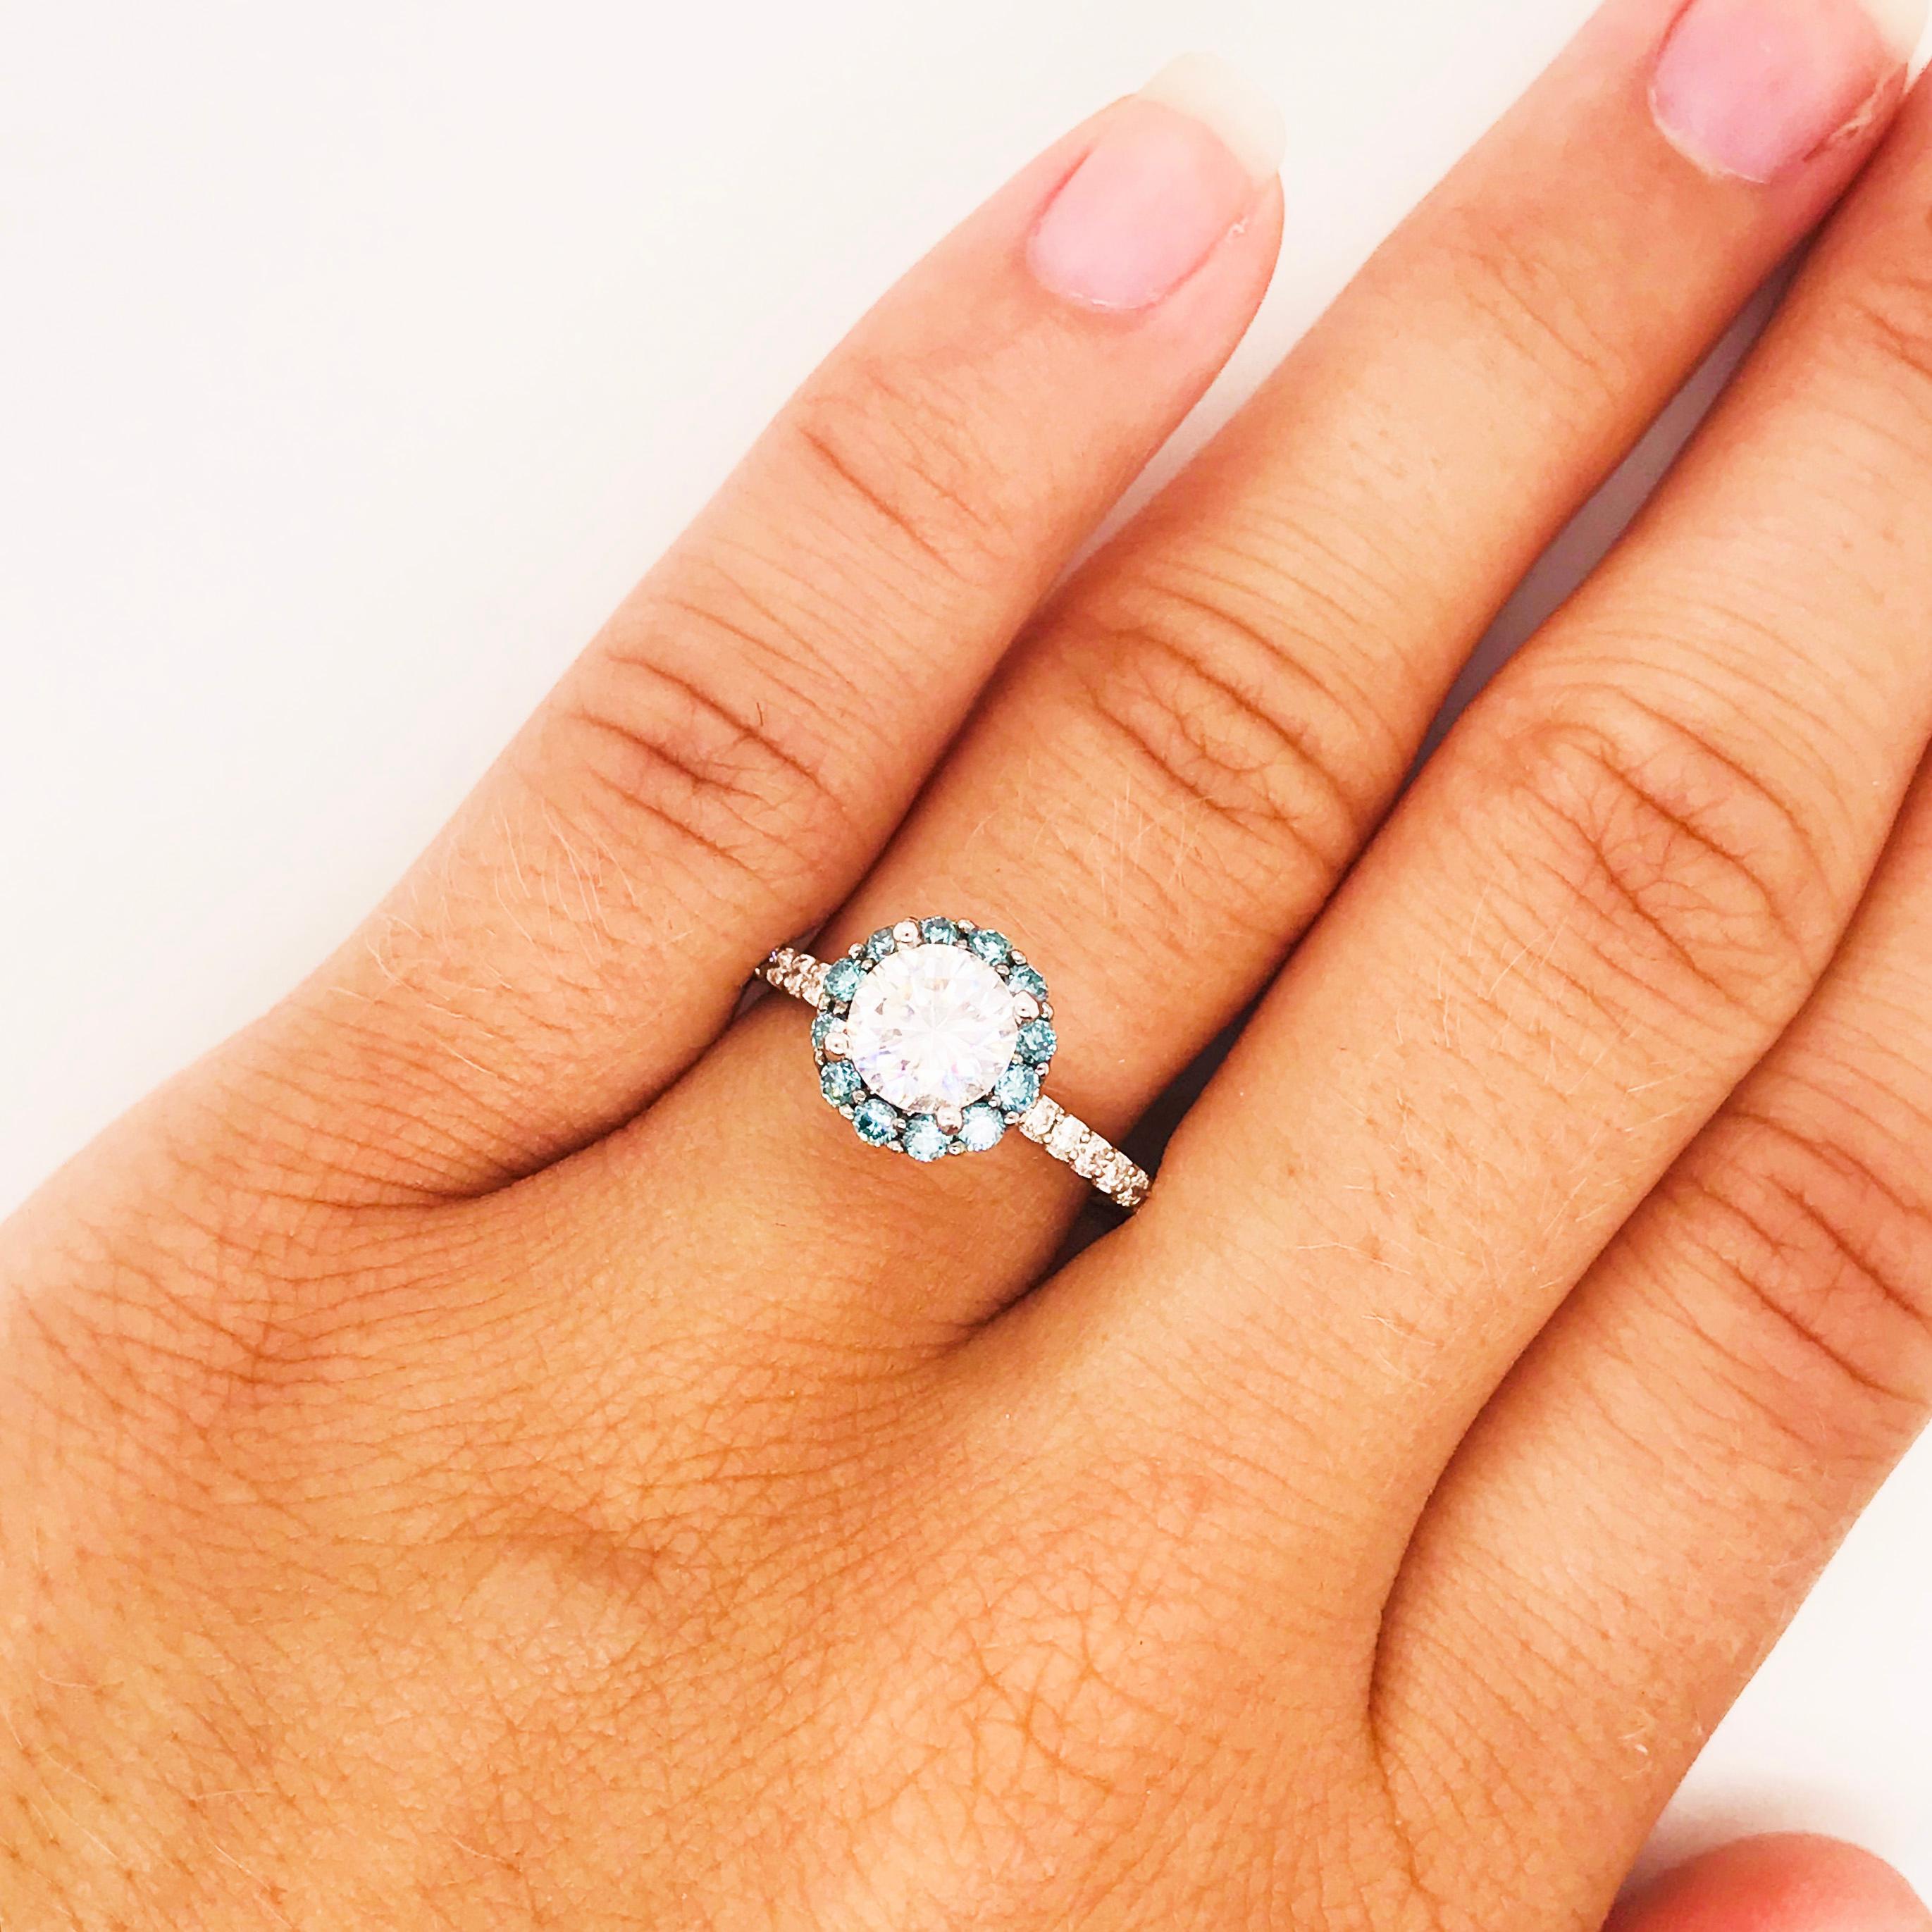 Gorgeous ice blue diamond halo round brilliant diamond engagement ring! This unique ring has a gorgeous round brilliant diamond set in the center of an ice blue diamond halo! The diamond halo is made of round brilliant blue diamonds. There are two